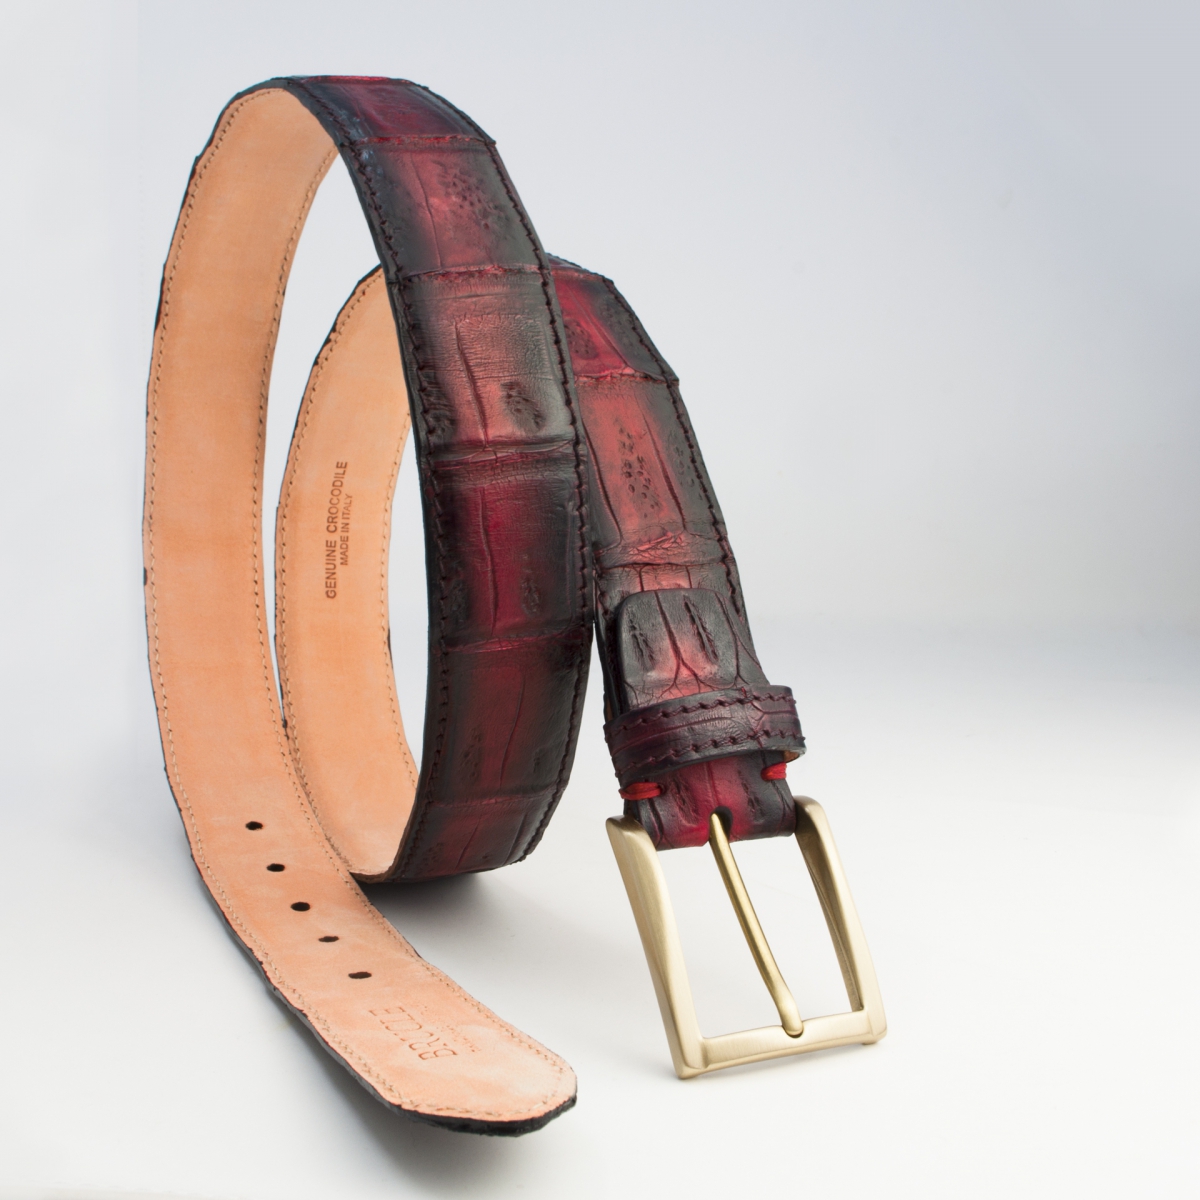 BRUCLE Hand patinated nickel free belt for men and women in crocodile tail, burgundy tones